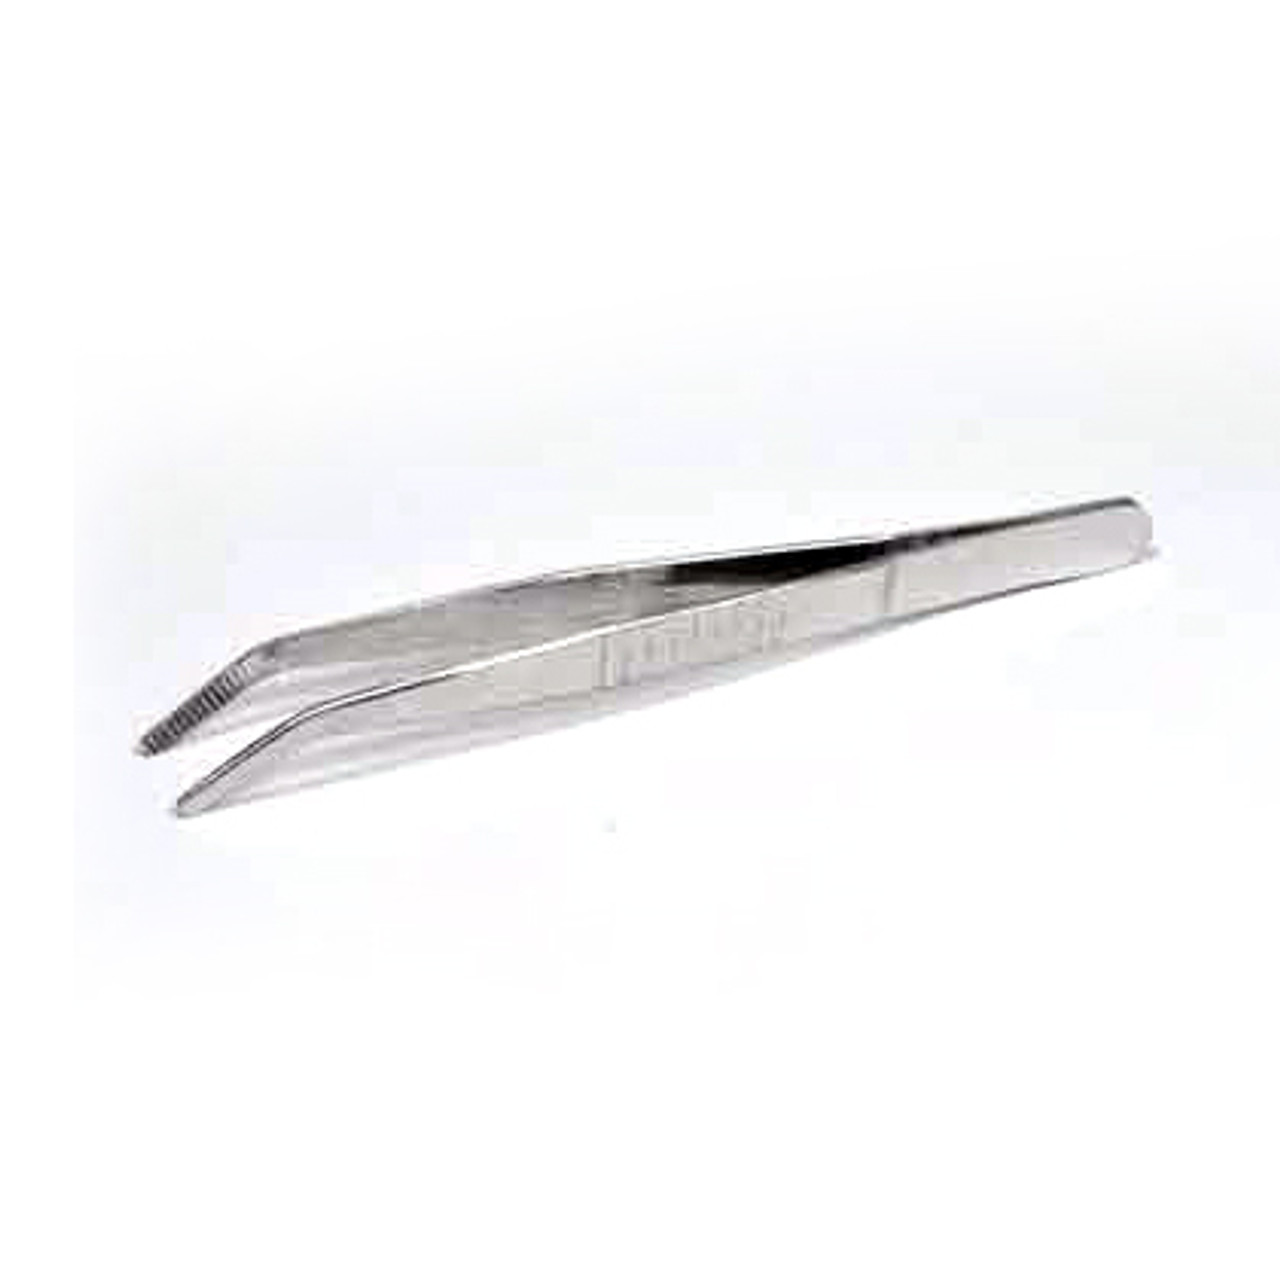 Rubber Coated Forcep (12)